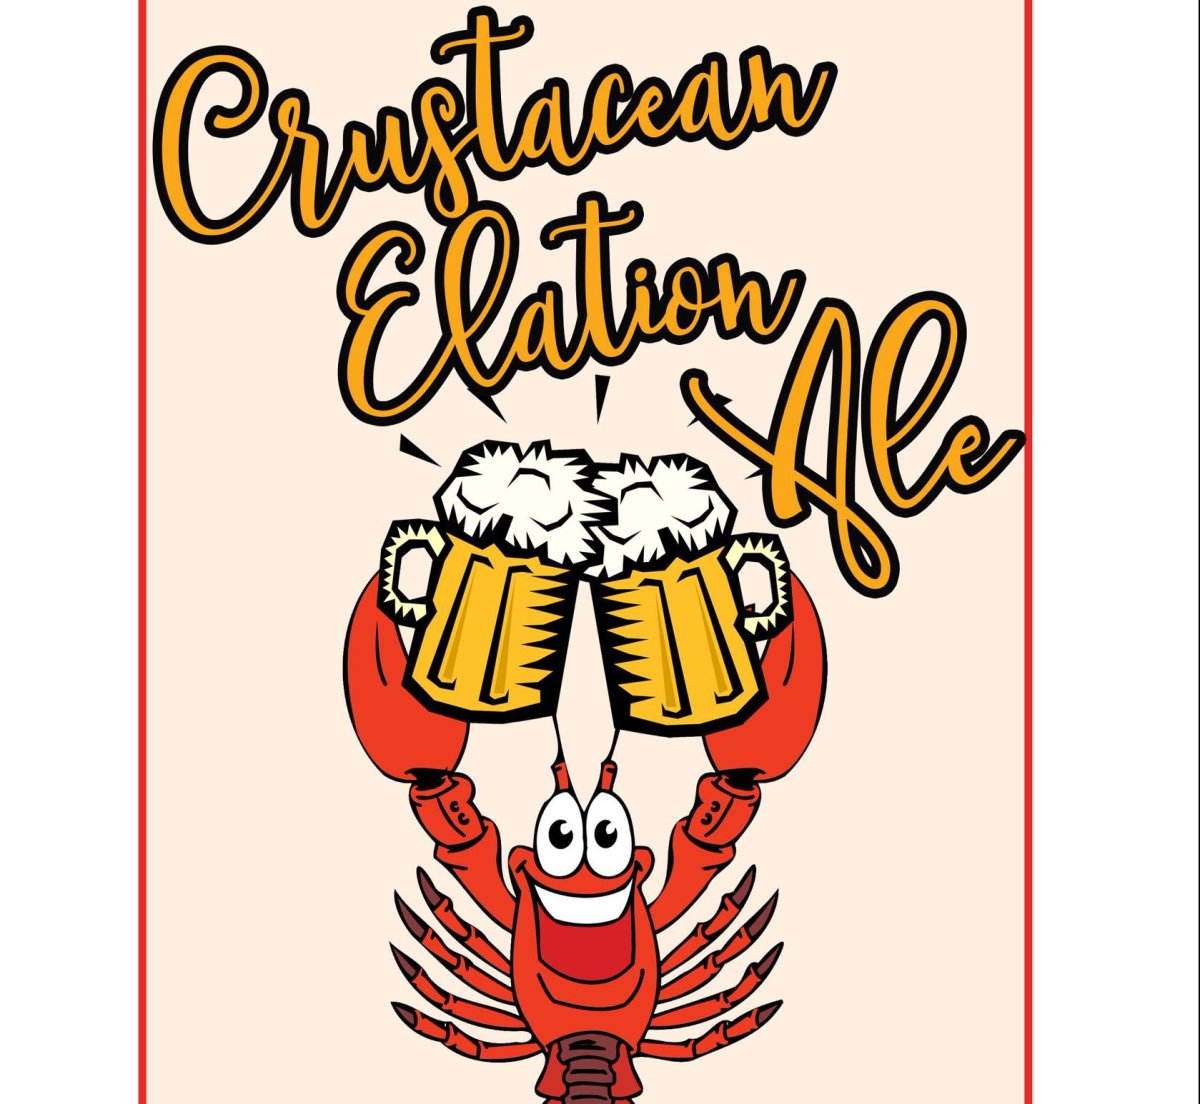  Saltbox Brewery in Mahone Bay is now fermenting its first batch
of Crustacean Elation - a creation that involved the use of whole
lobsters early in the brewing process.